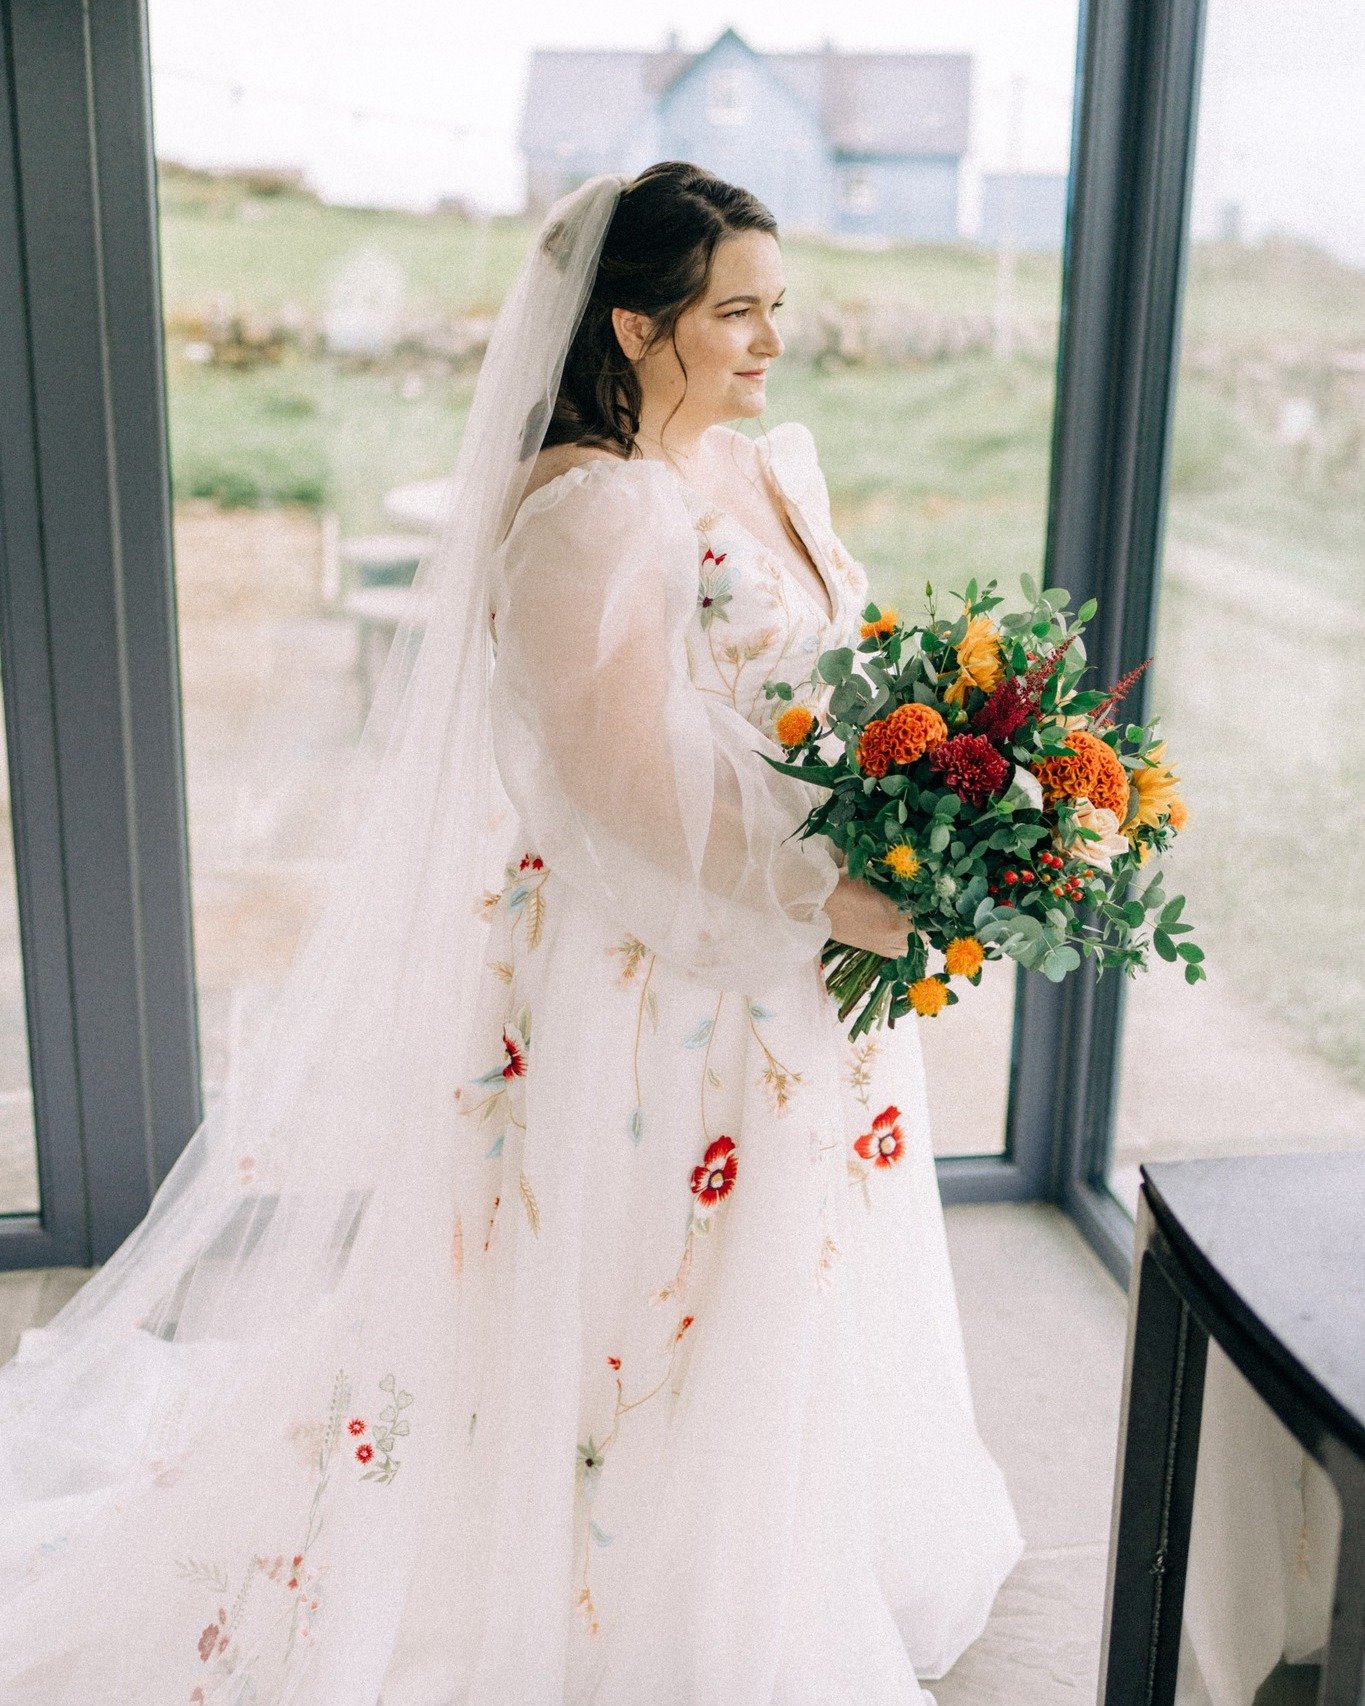 Ok a follow up post to keep bragging about @kpbreen2 ❤❤ @rebeccaschoneveld_bridal's embroidered gown is a work of wearable art! ❤ Photos by @pawelbebenca_photography 🥰🥰🥰